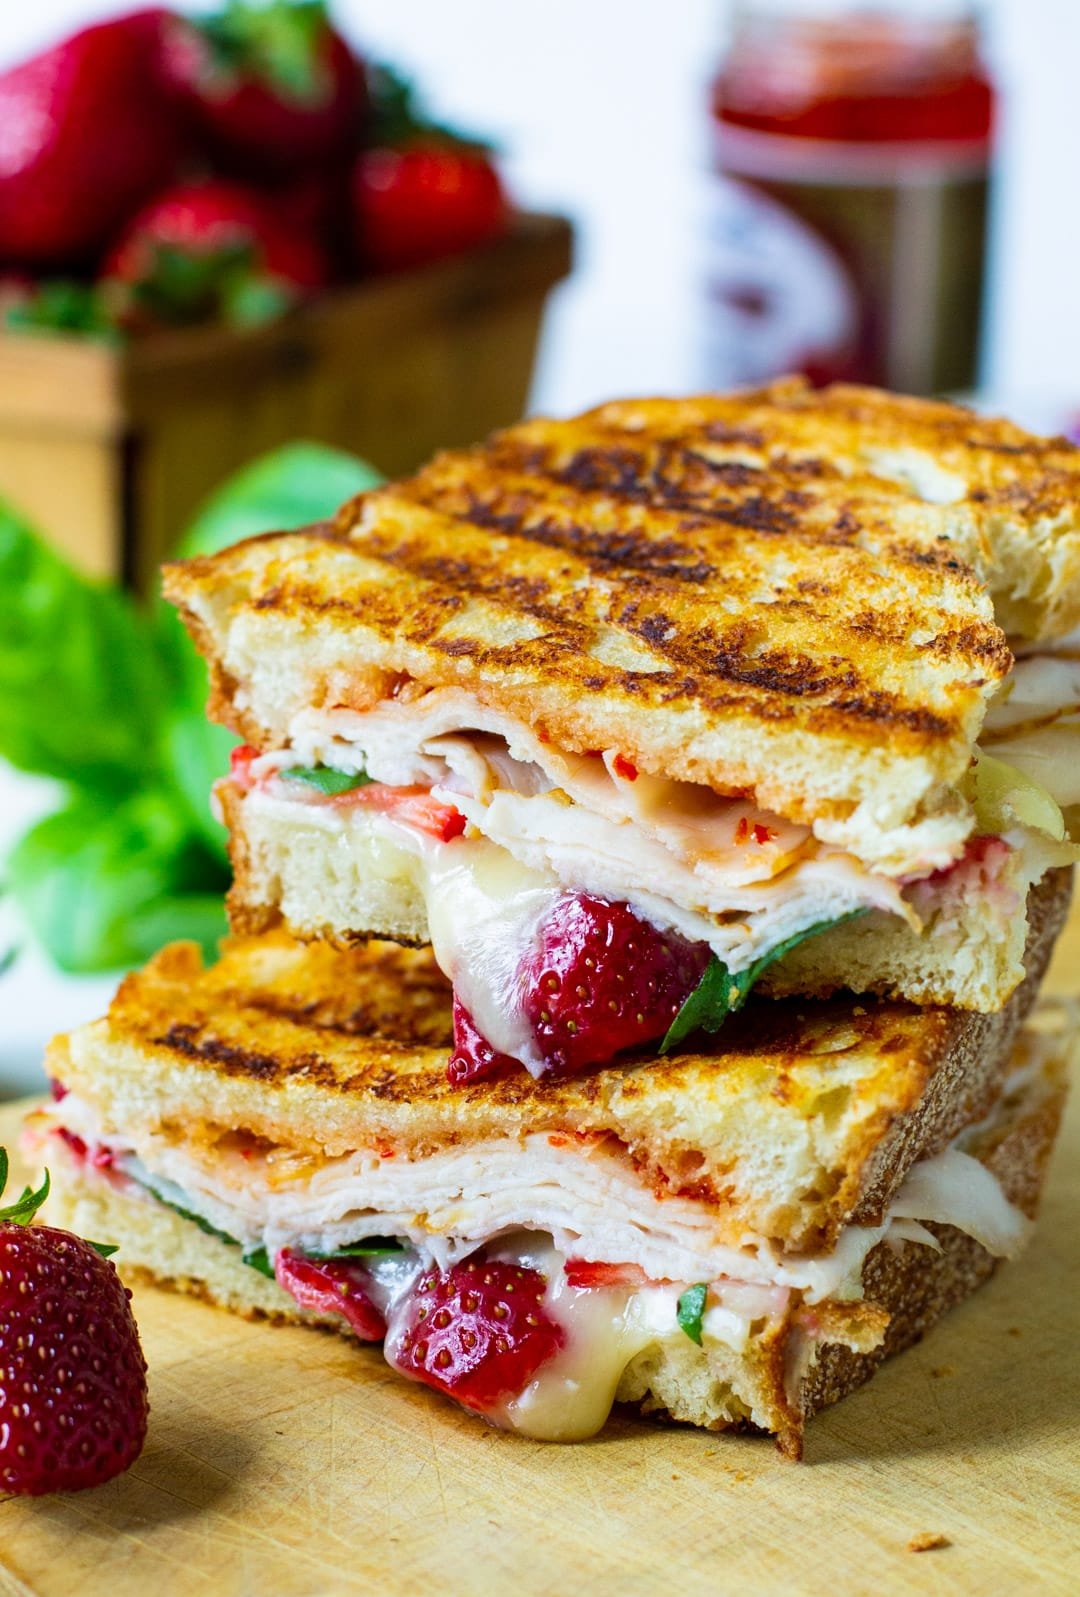 Turkey Panini cut in half and stacked.